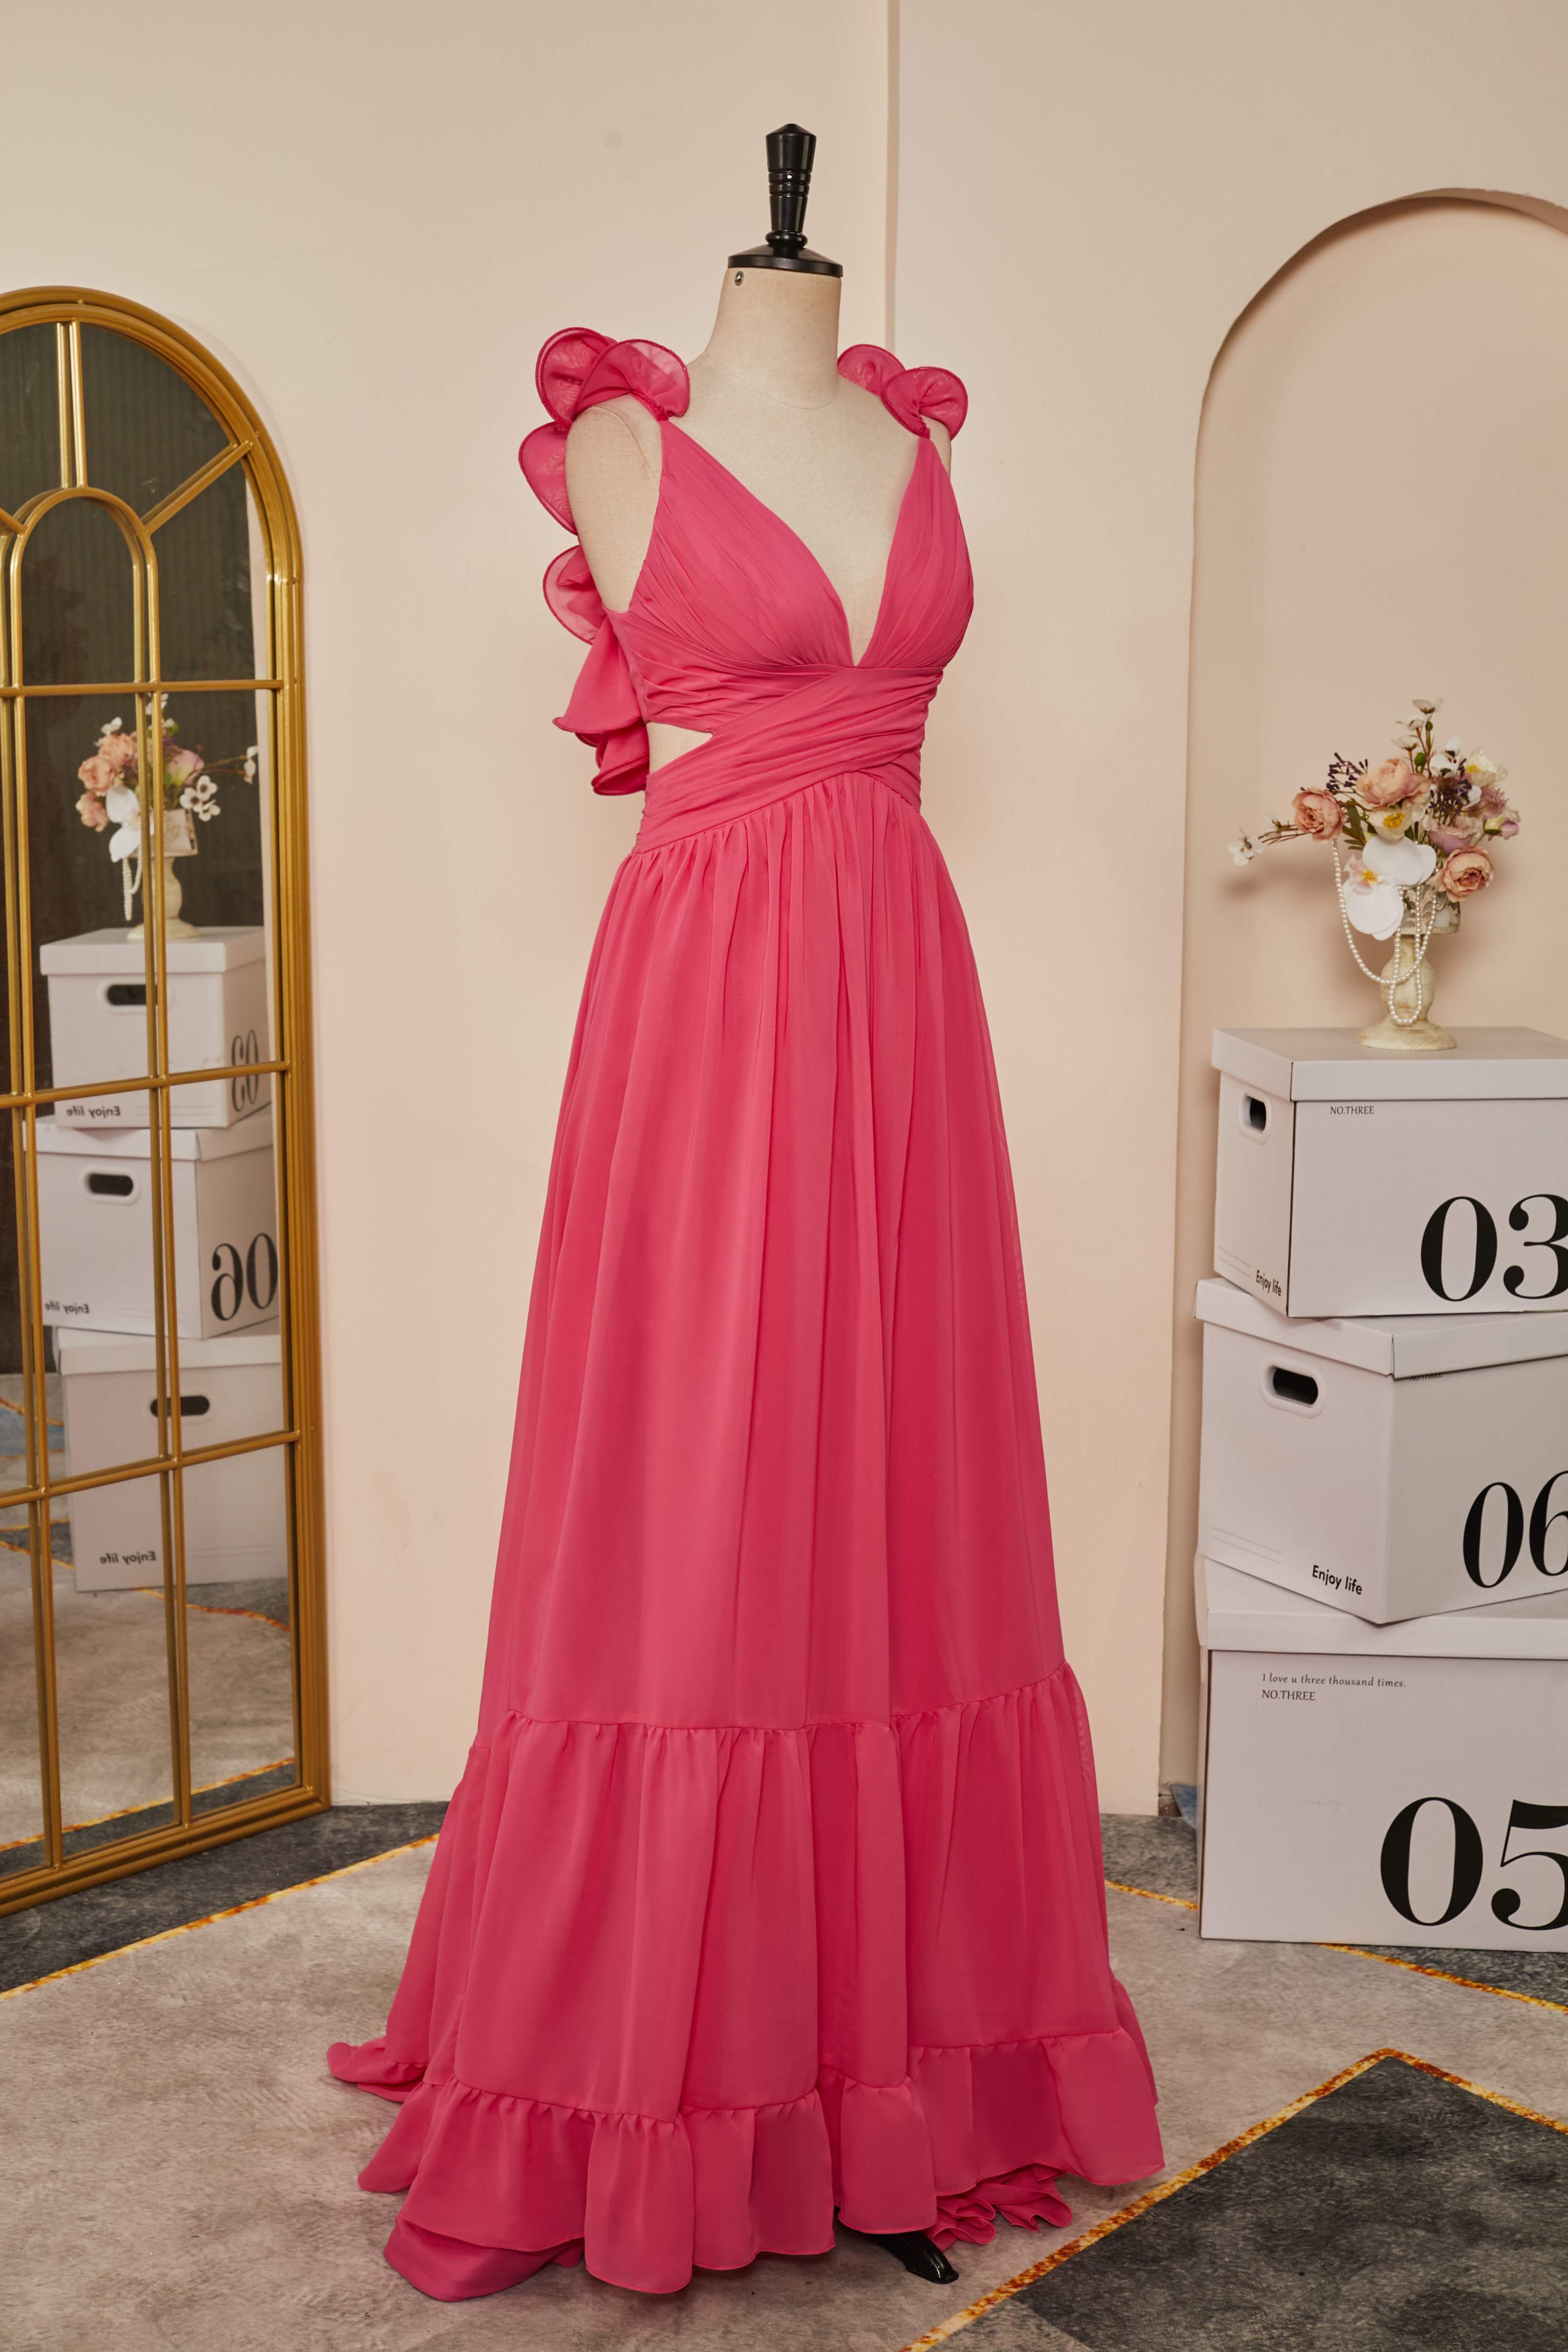 Party Dresses Styles, Rose Pink Ruffle Shoulder Plunging V Neck A-line Lace-Up Long Prom Dress